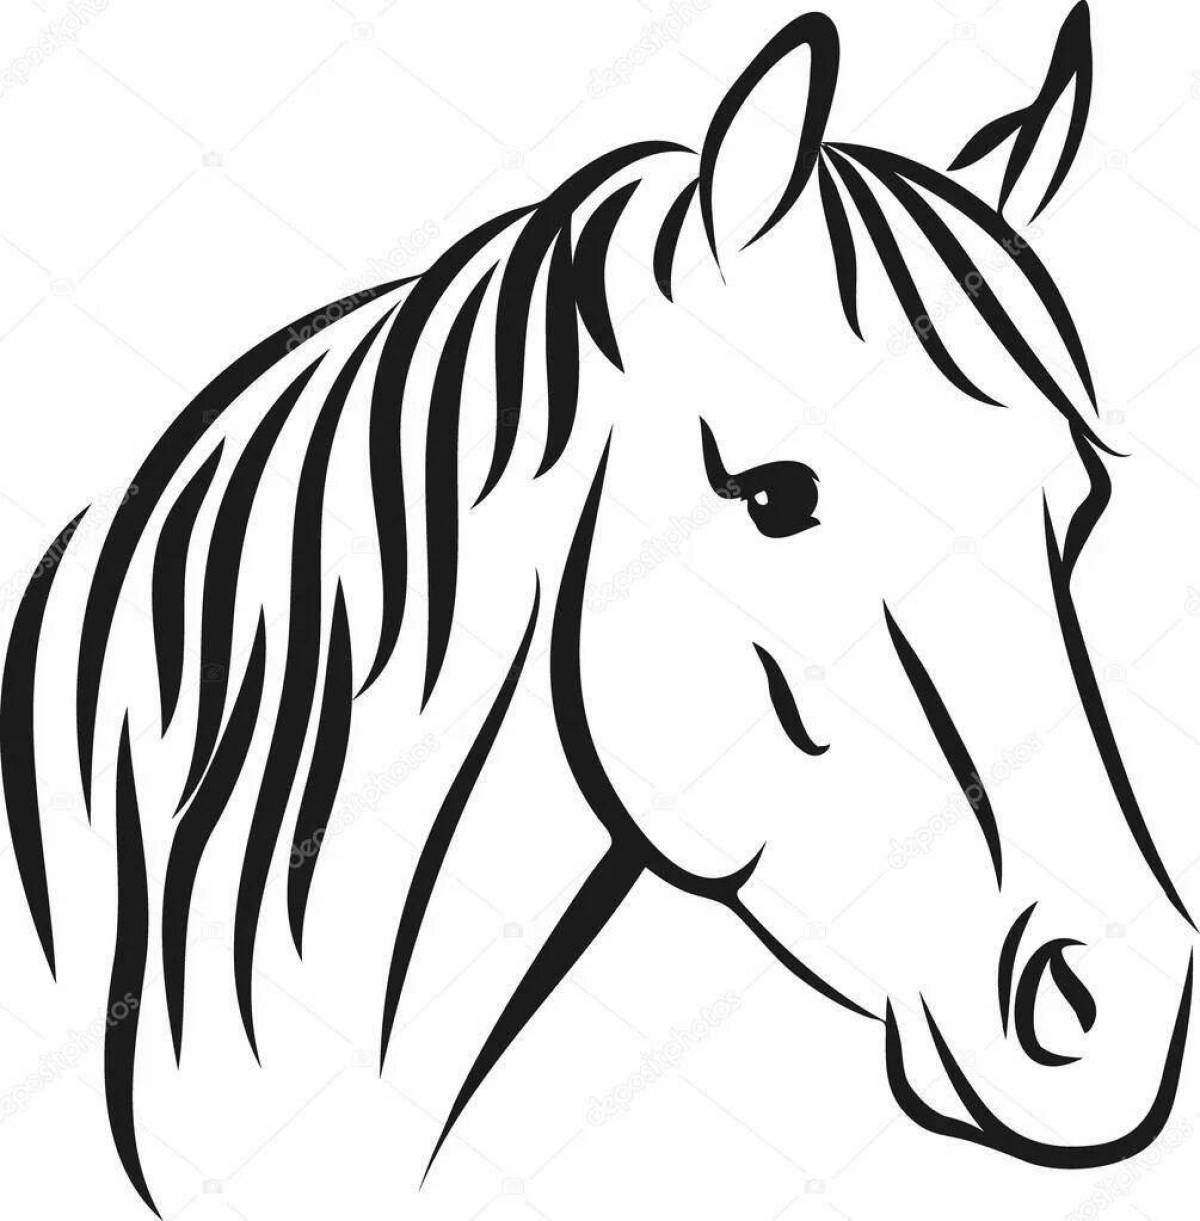 Great horse head coloring book